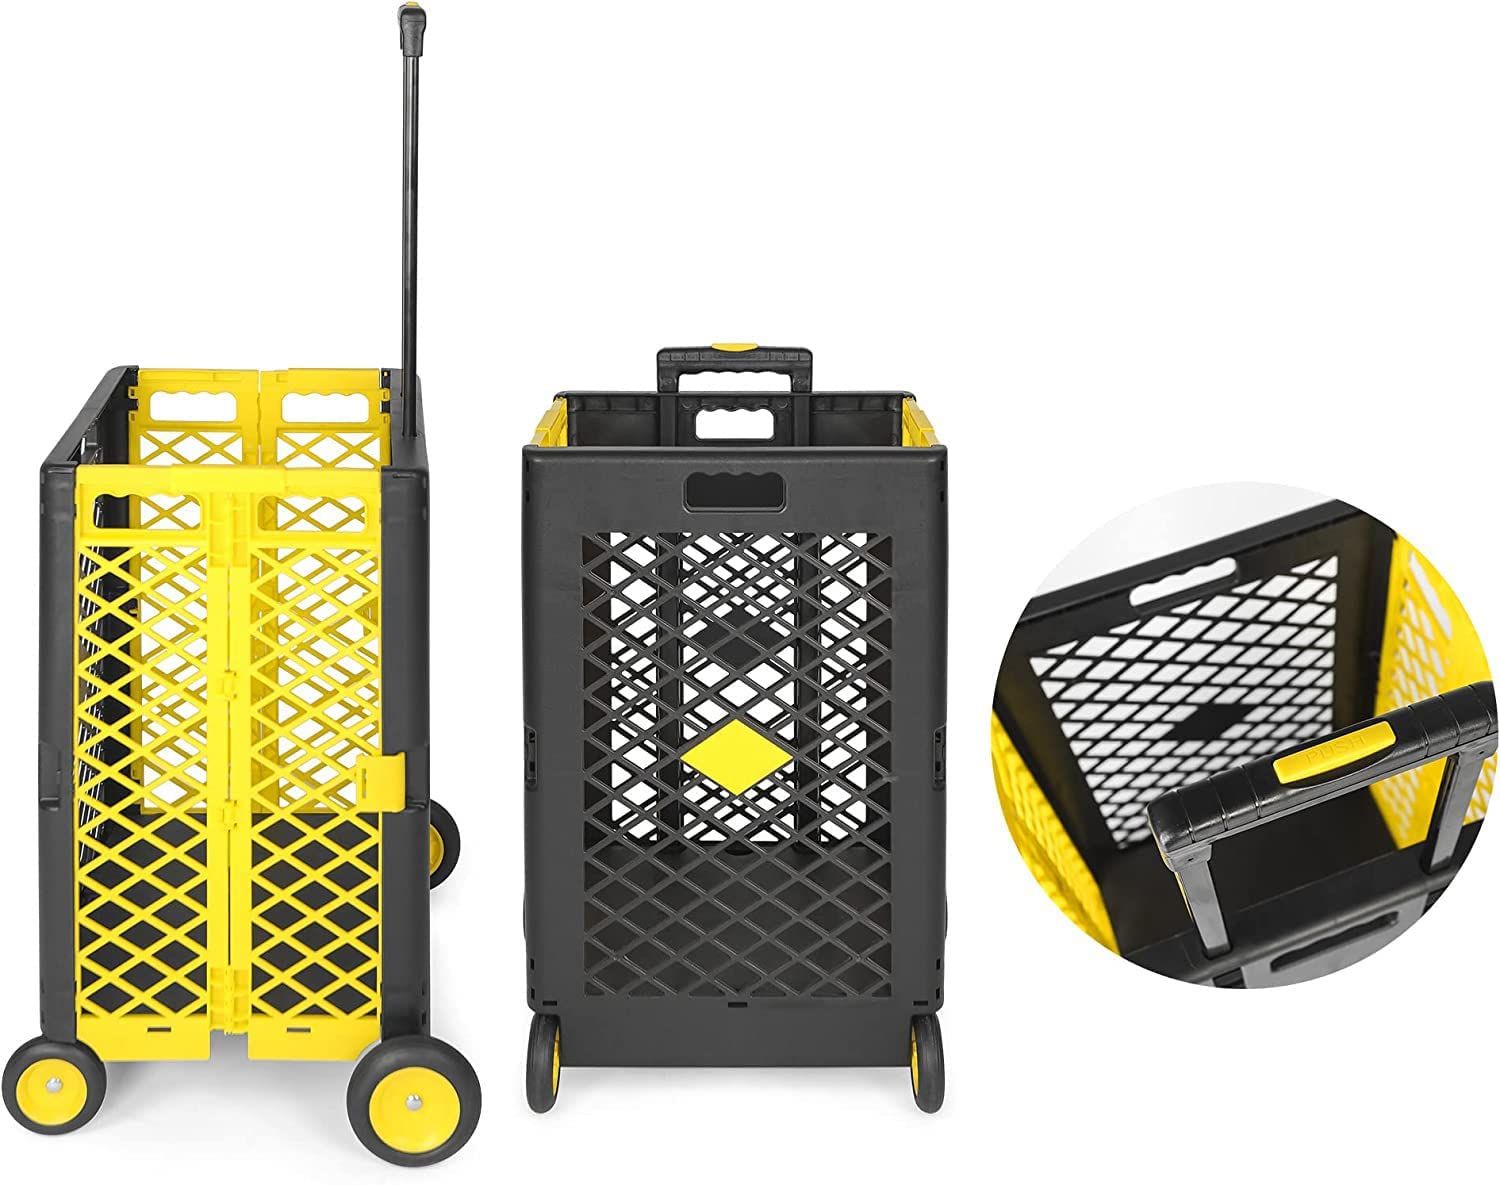 55L Foldable Rolling Cart with Wheels, Portable Updated Utility Tools Rolling Crate w/ Telescopic Handle, Yellow